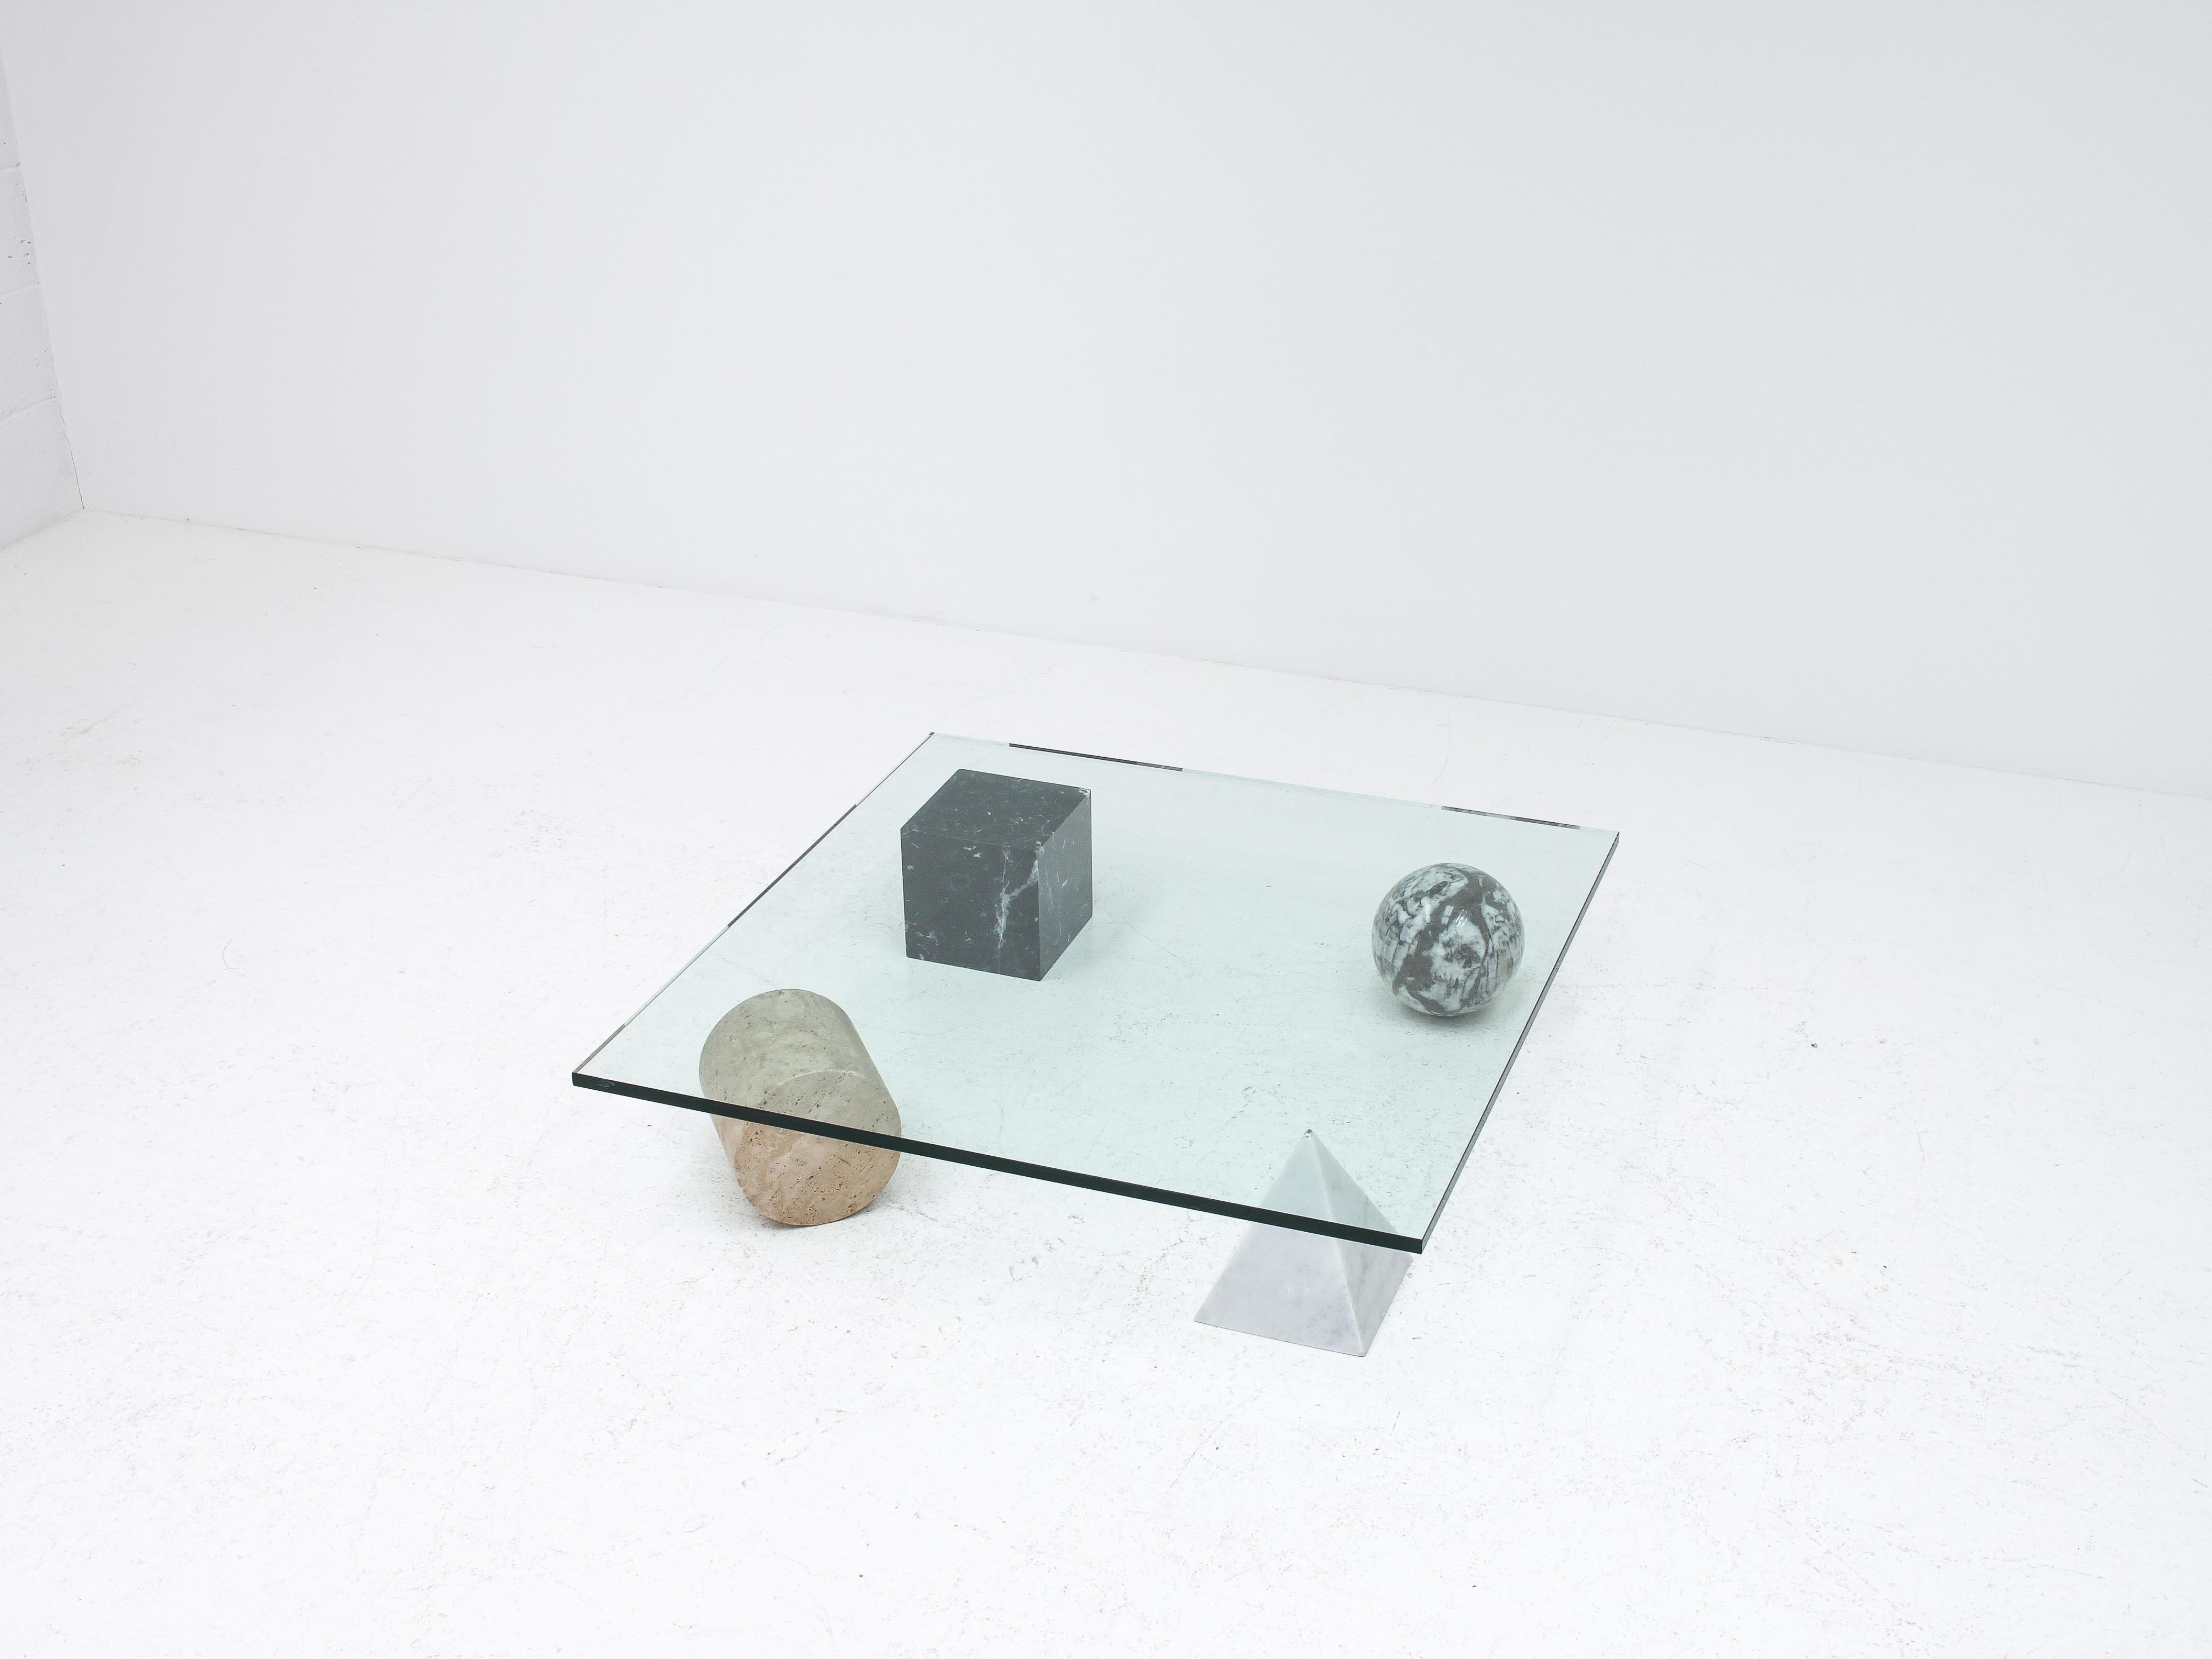 A ‘Metafora’ coffee table by Massimo and Lella Vignelli for Casigliani, Italy, 1979. 

Constructed of four geometric marble shapes which form the base including a solid Carrara marble pyramid, travertine cylinder, black marble block and granite